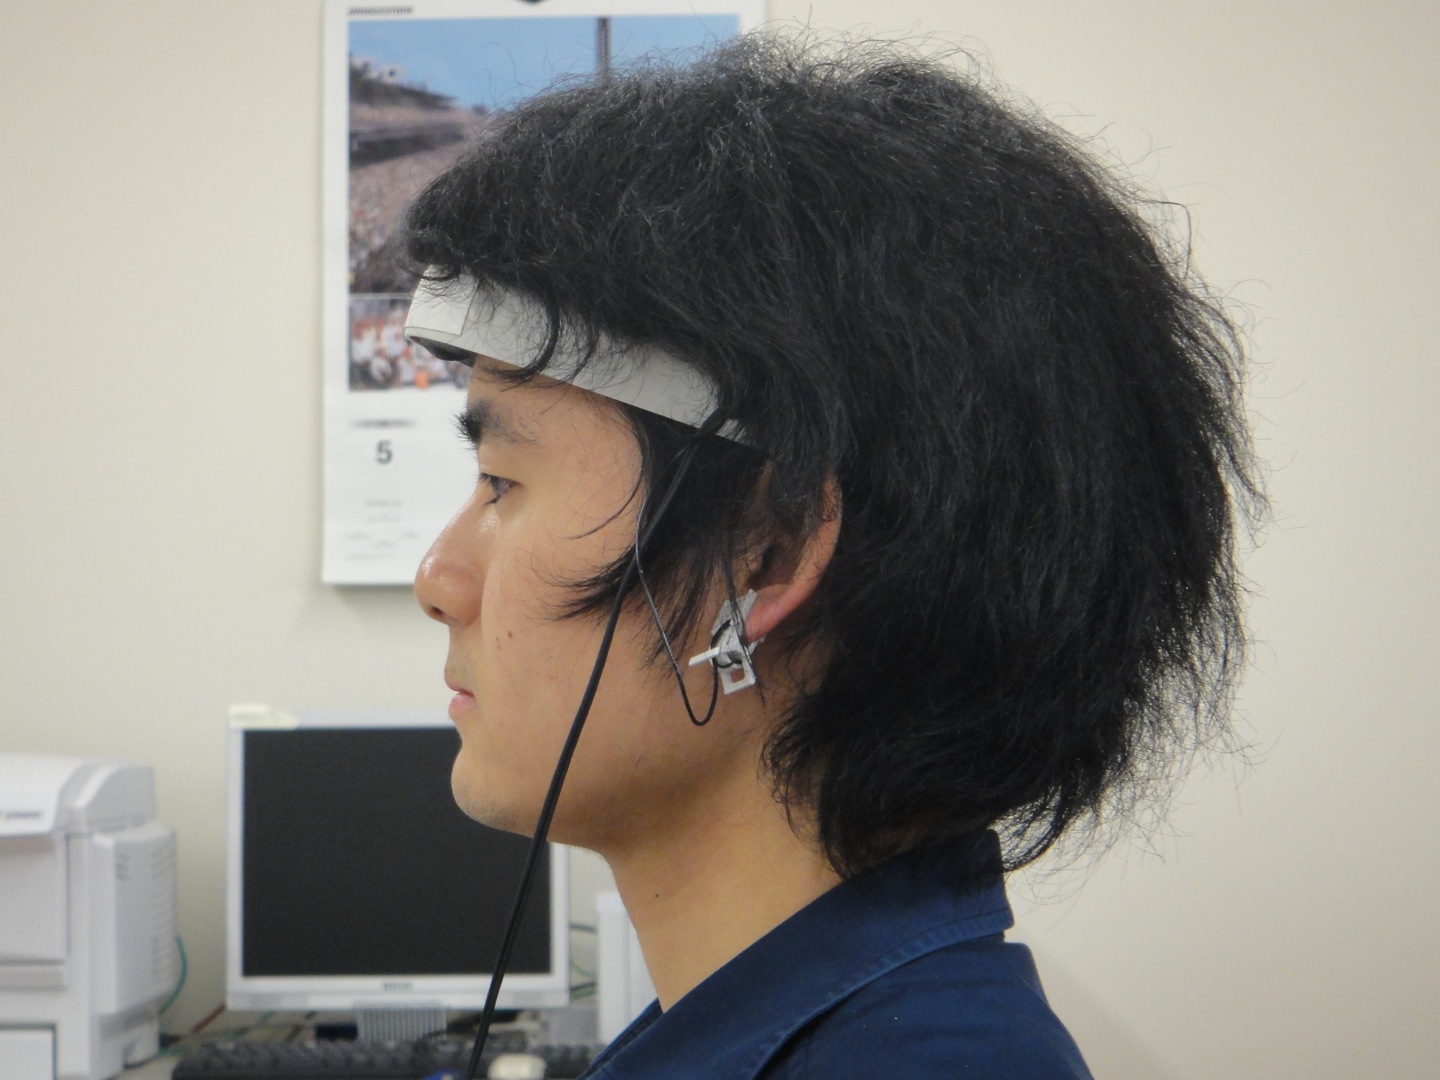 [Video] Brain Wave Meter - Detects what you're thinking